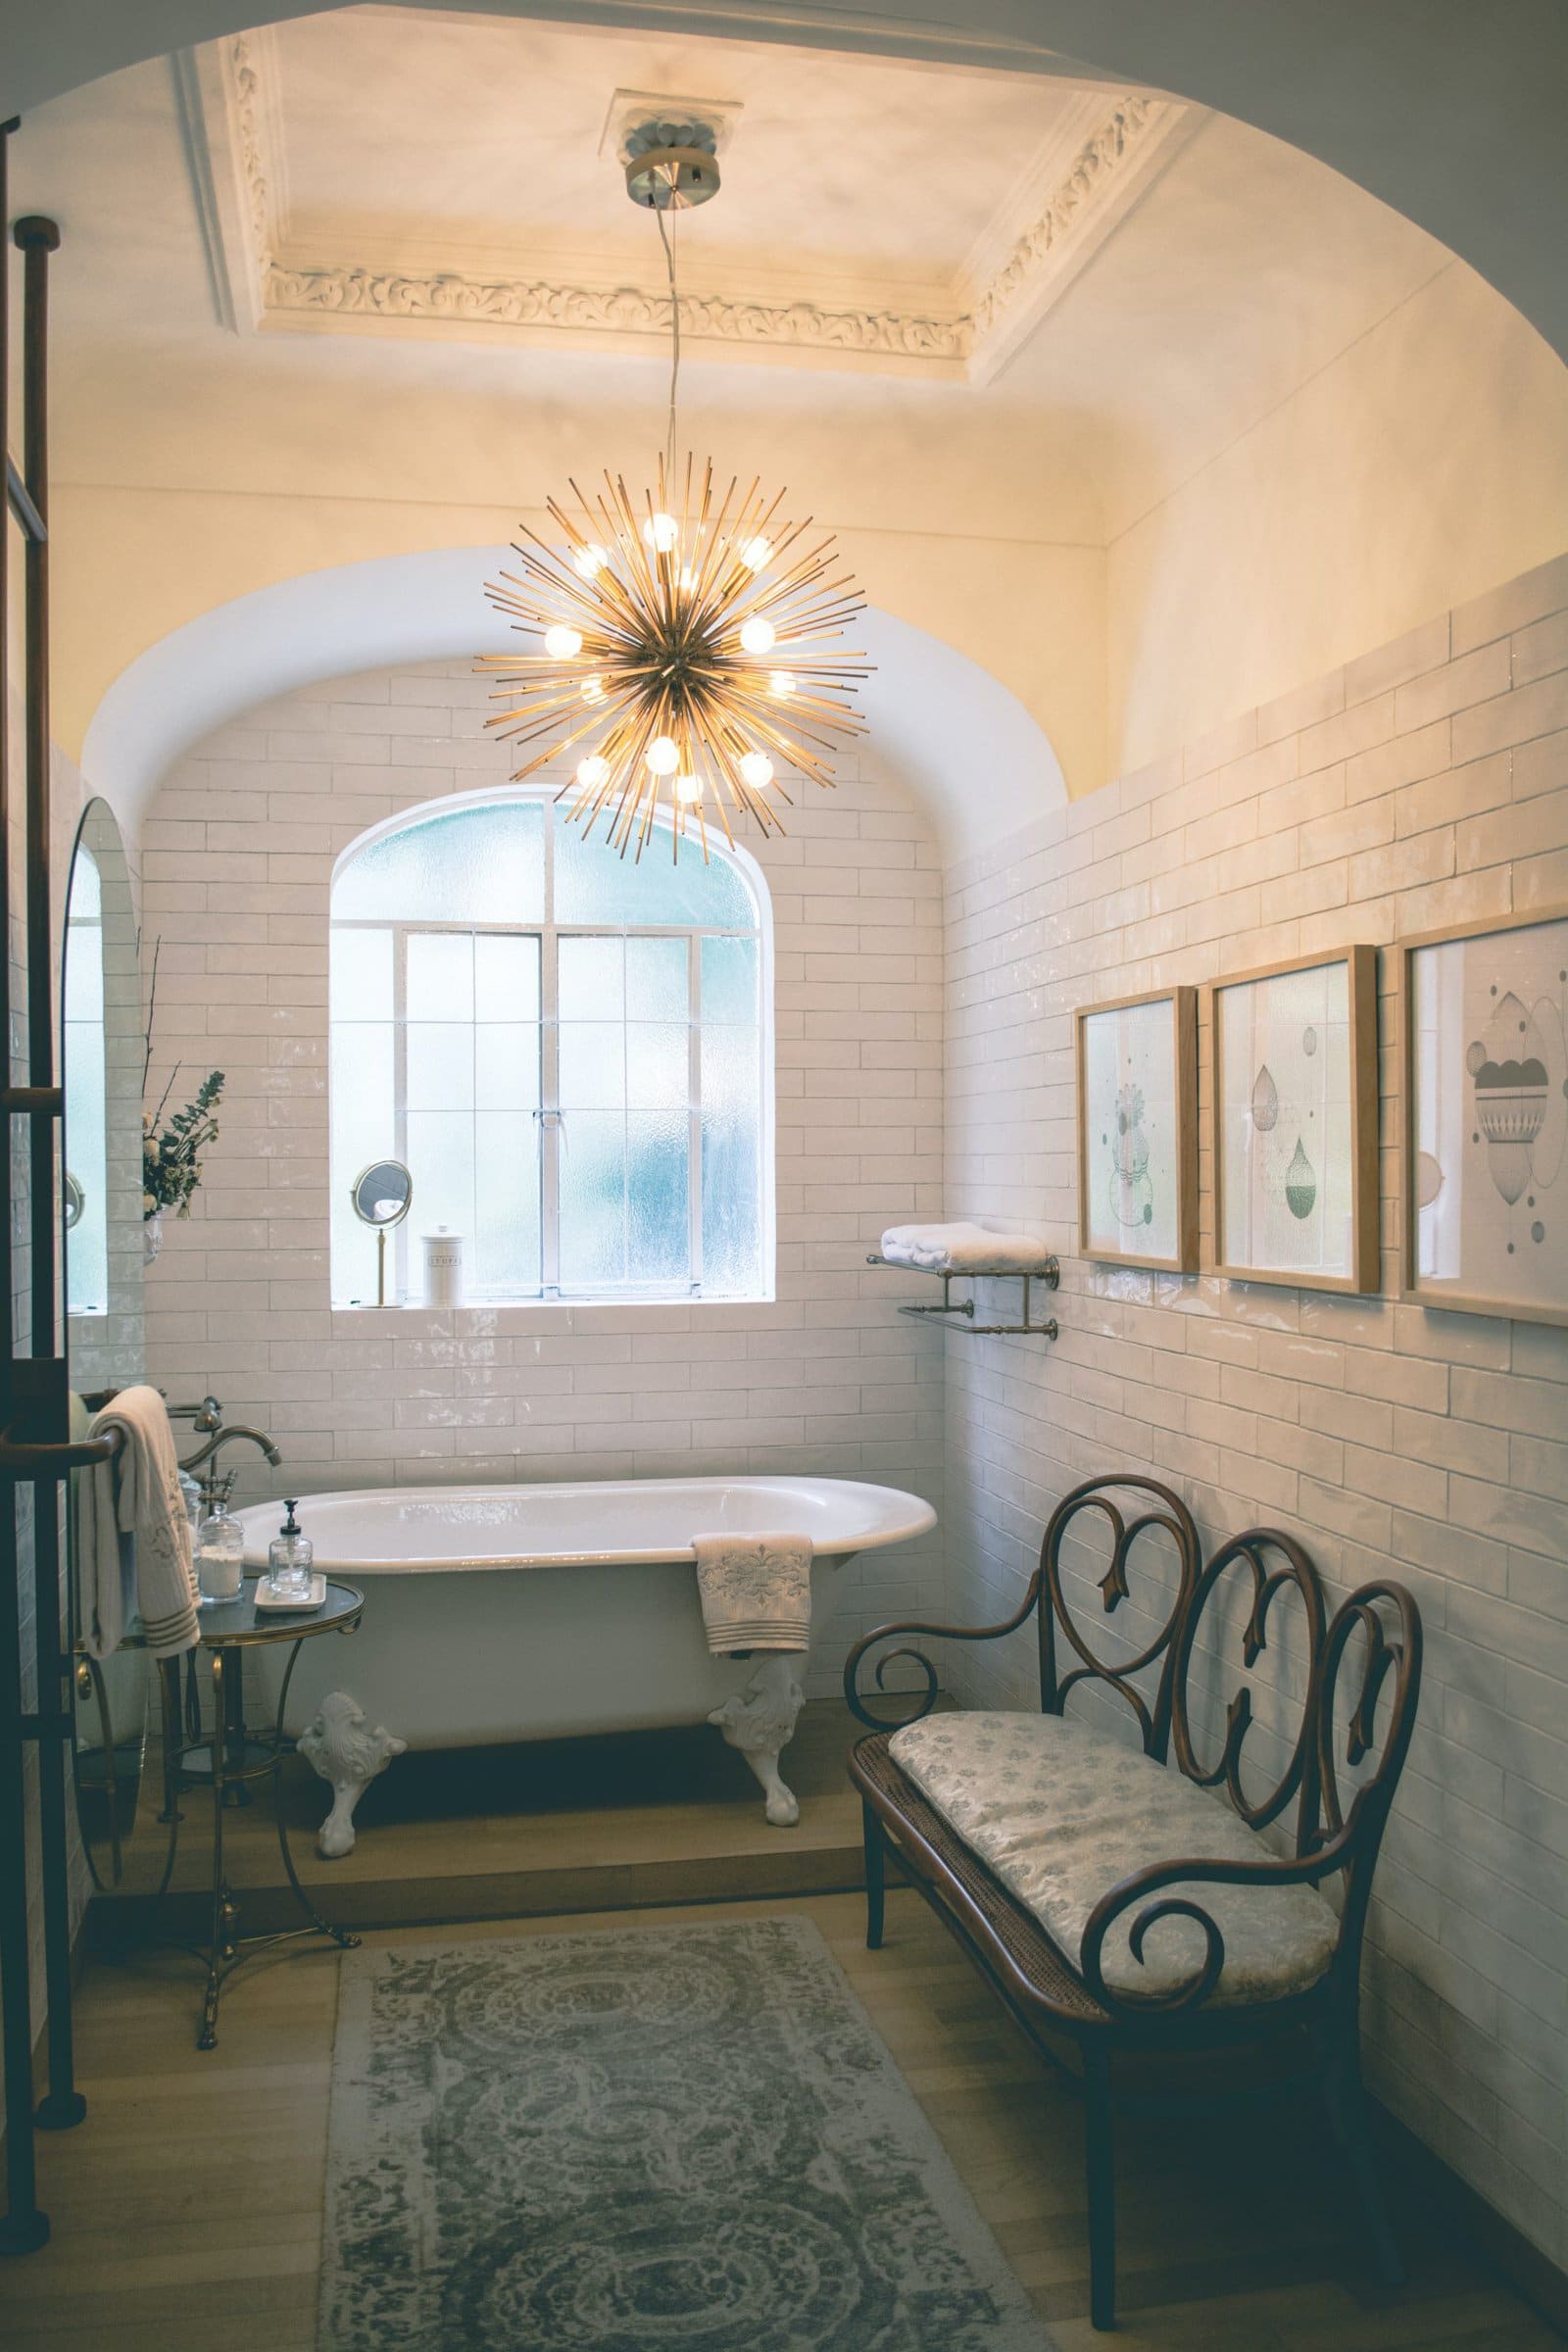  Dreaming of an Antique Tub scaled